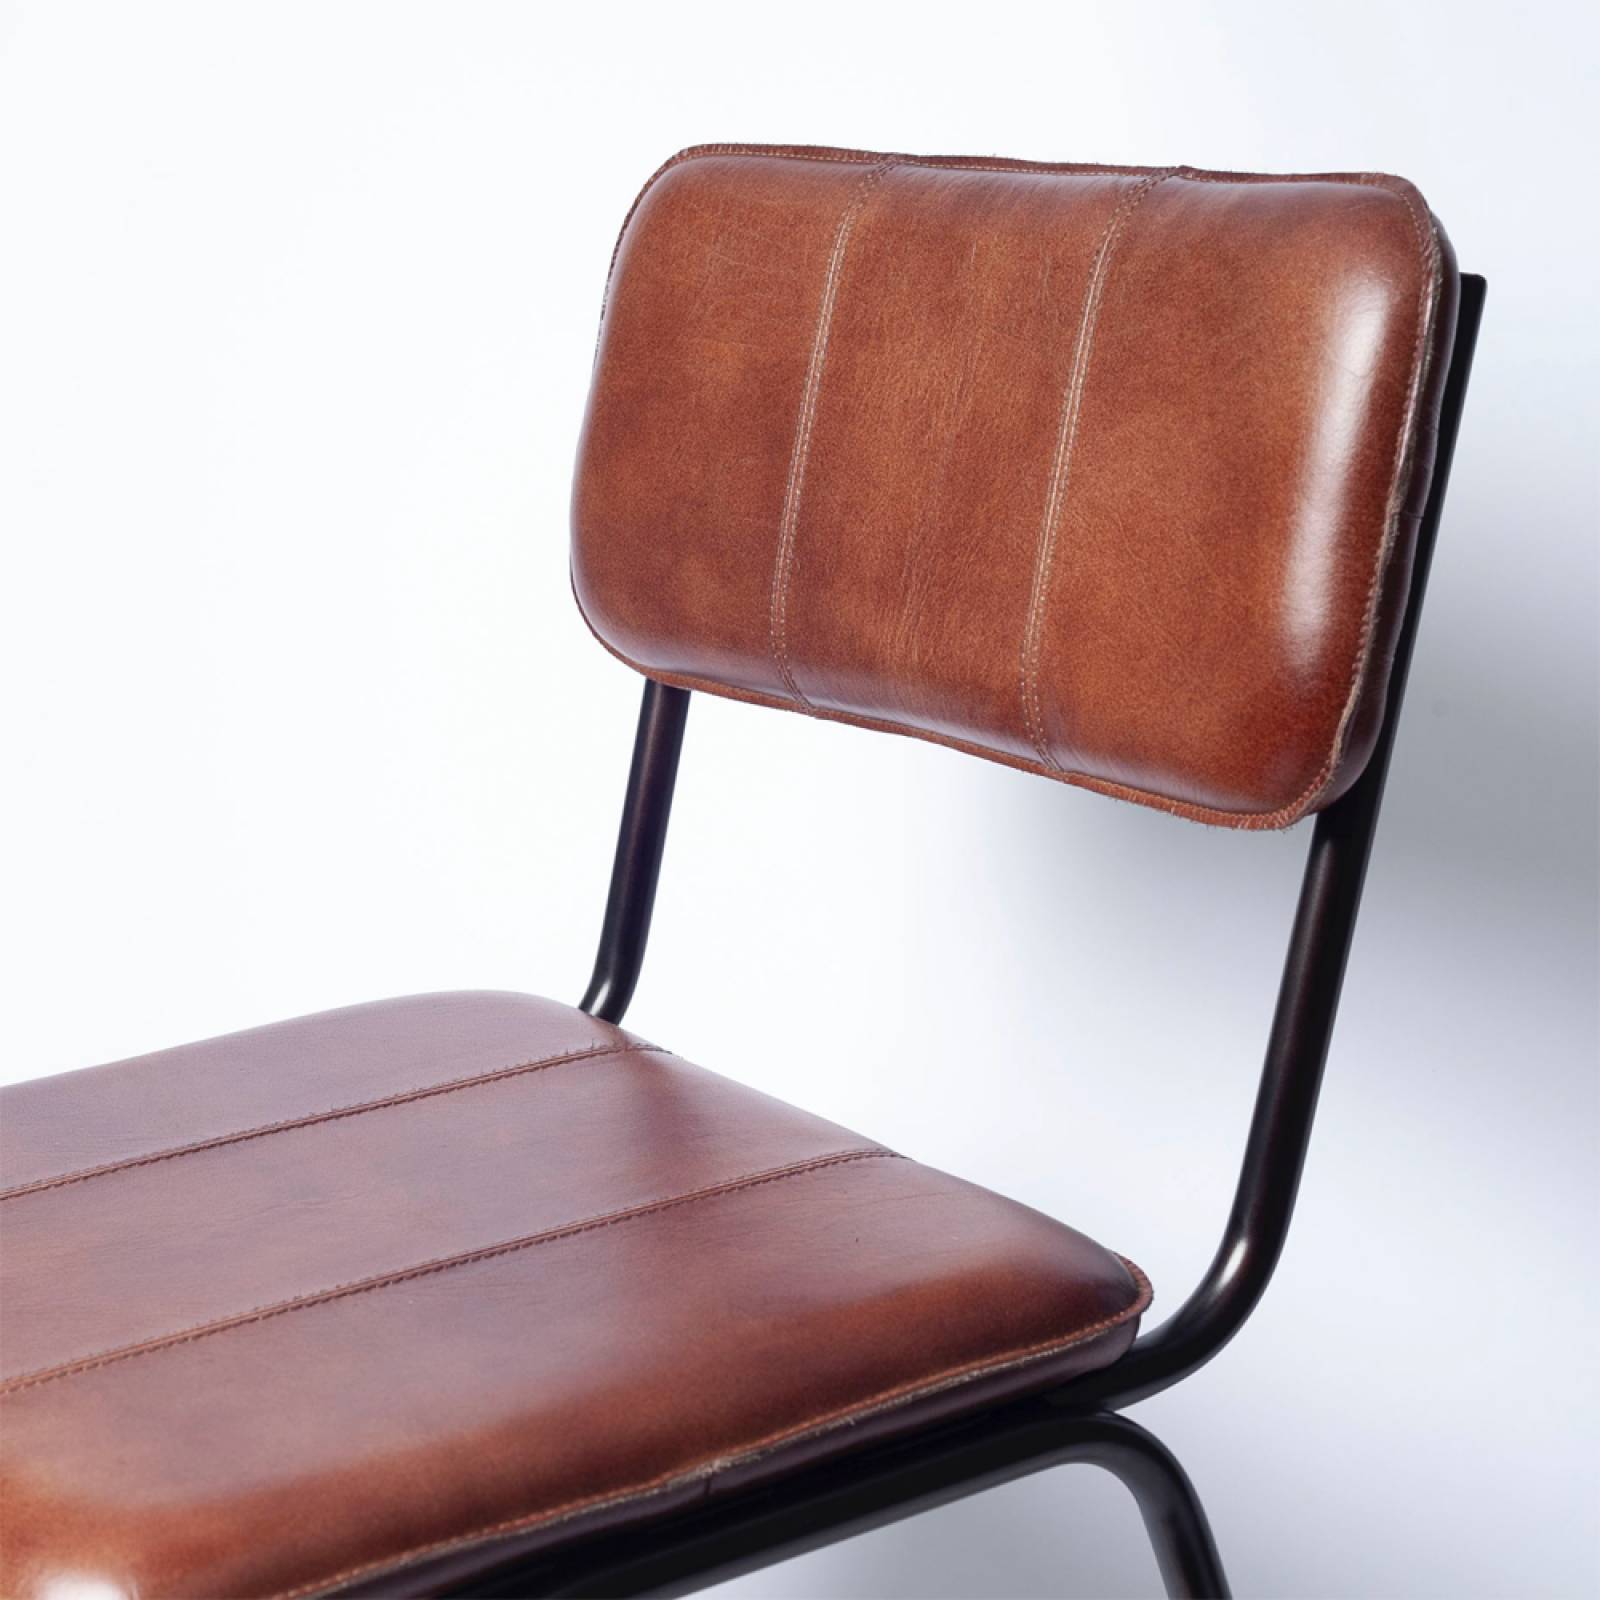 Ukari Dining Chair In Chocolate Leather thumbnails